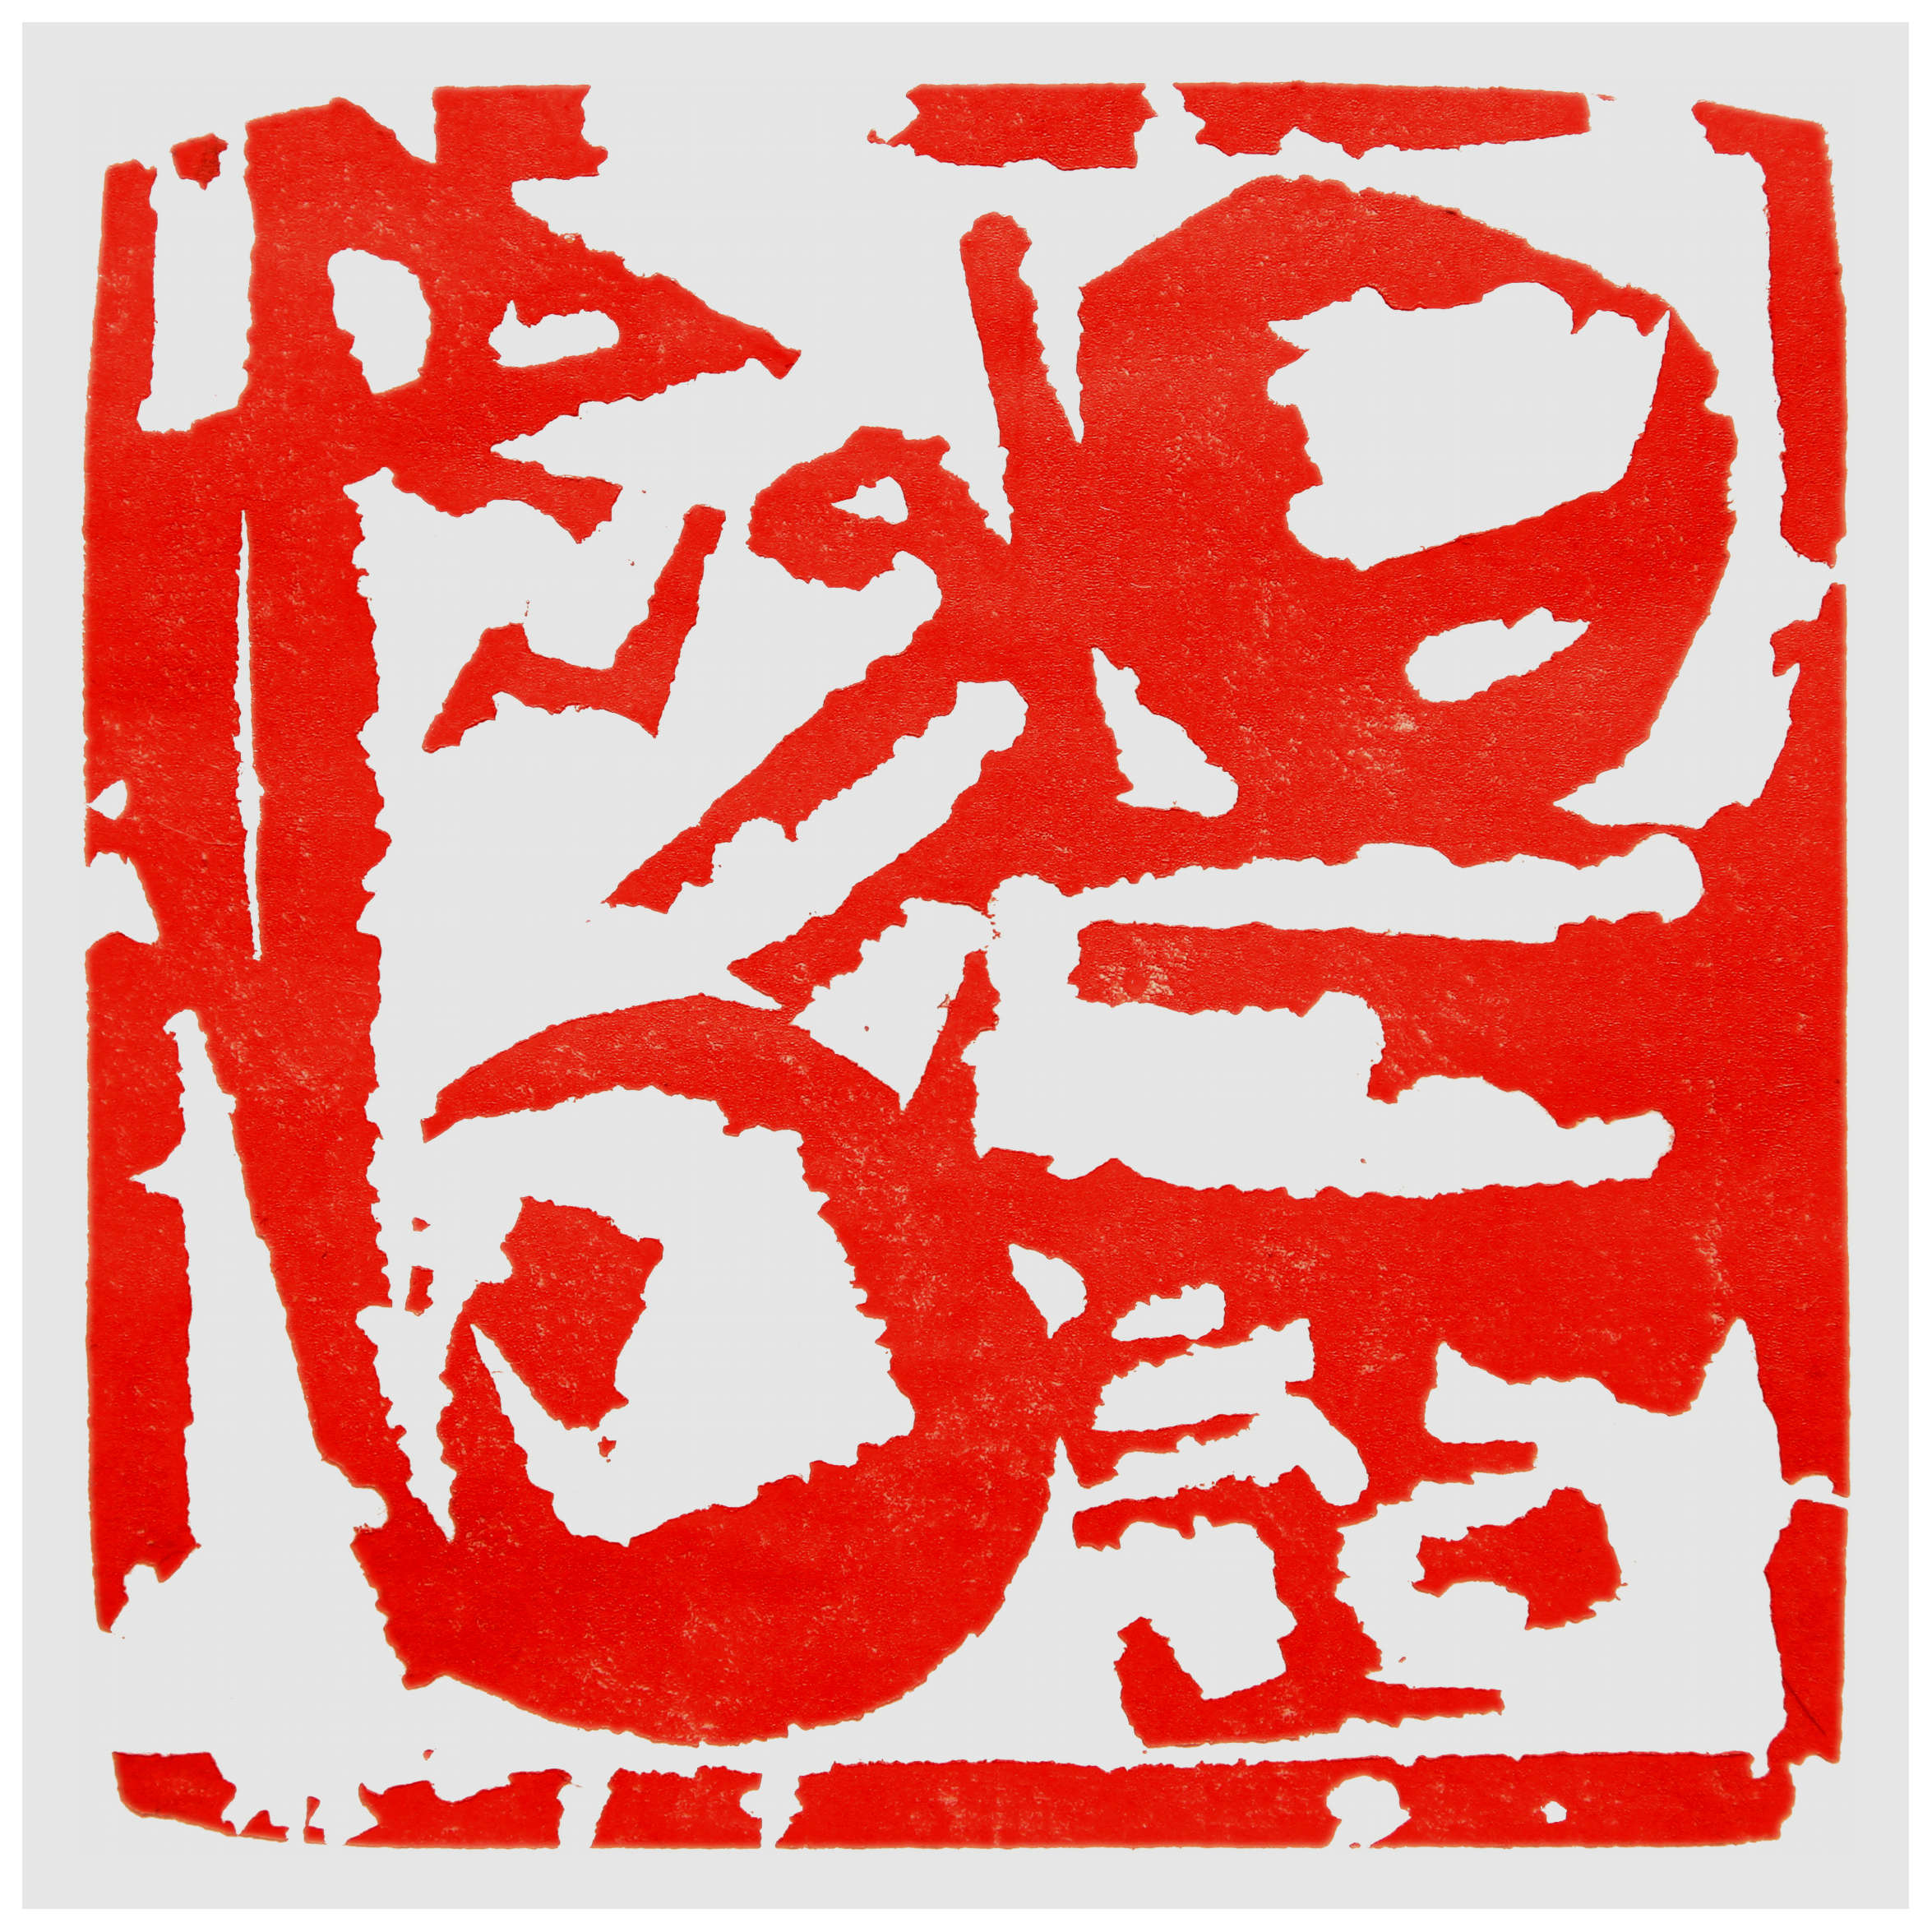 Sai Koh (Qi Hong)’s freehand brushwork Chinese seal carving (Chinese seal engraving, Chinese seal cutting) – A Free Seal “Every Day Is A Good Day”, 140×140mm, the active surface of the Qingtian stone seal carved in relief with red Chinese characters imprint